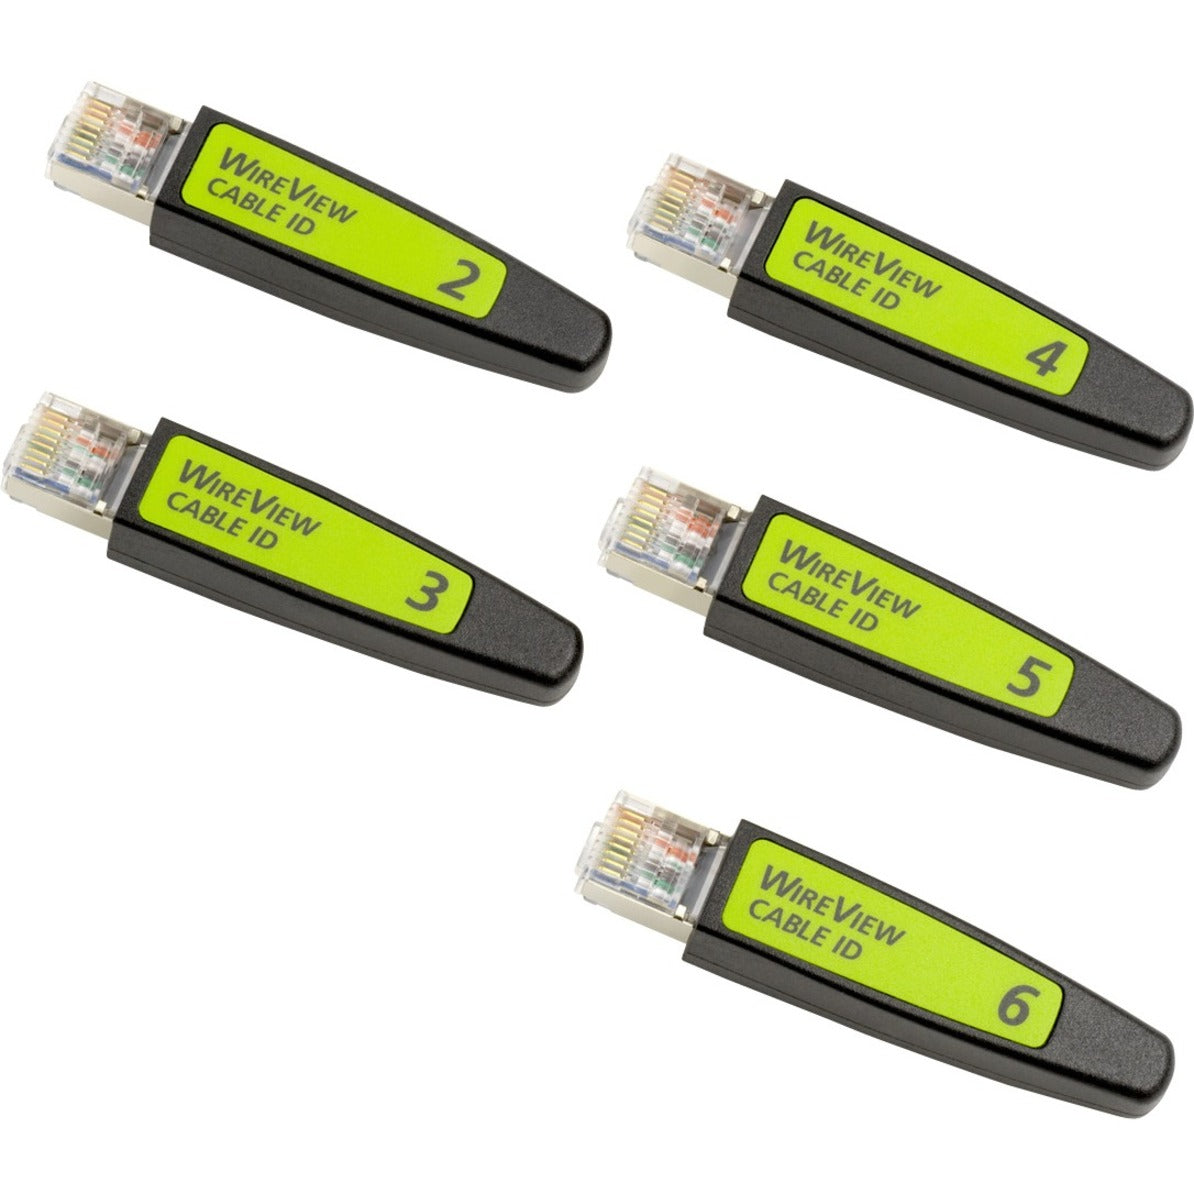 NetAlly WireView Cable IDs #2-6 (WIREVIEW 2-6) Main image